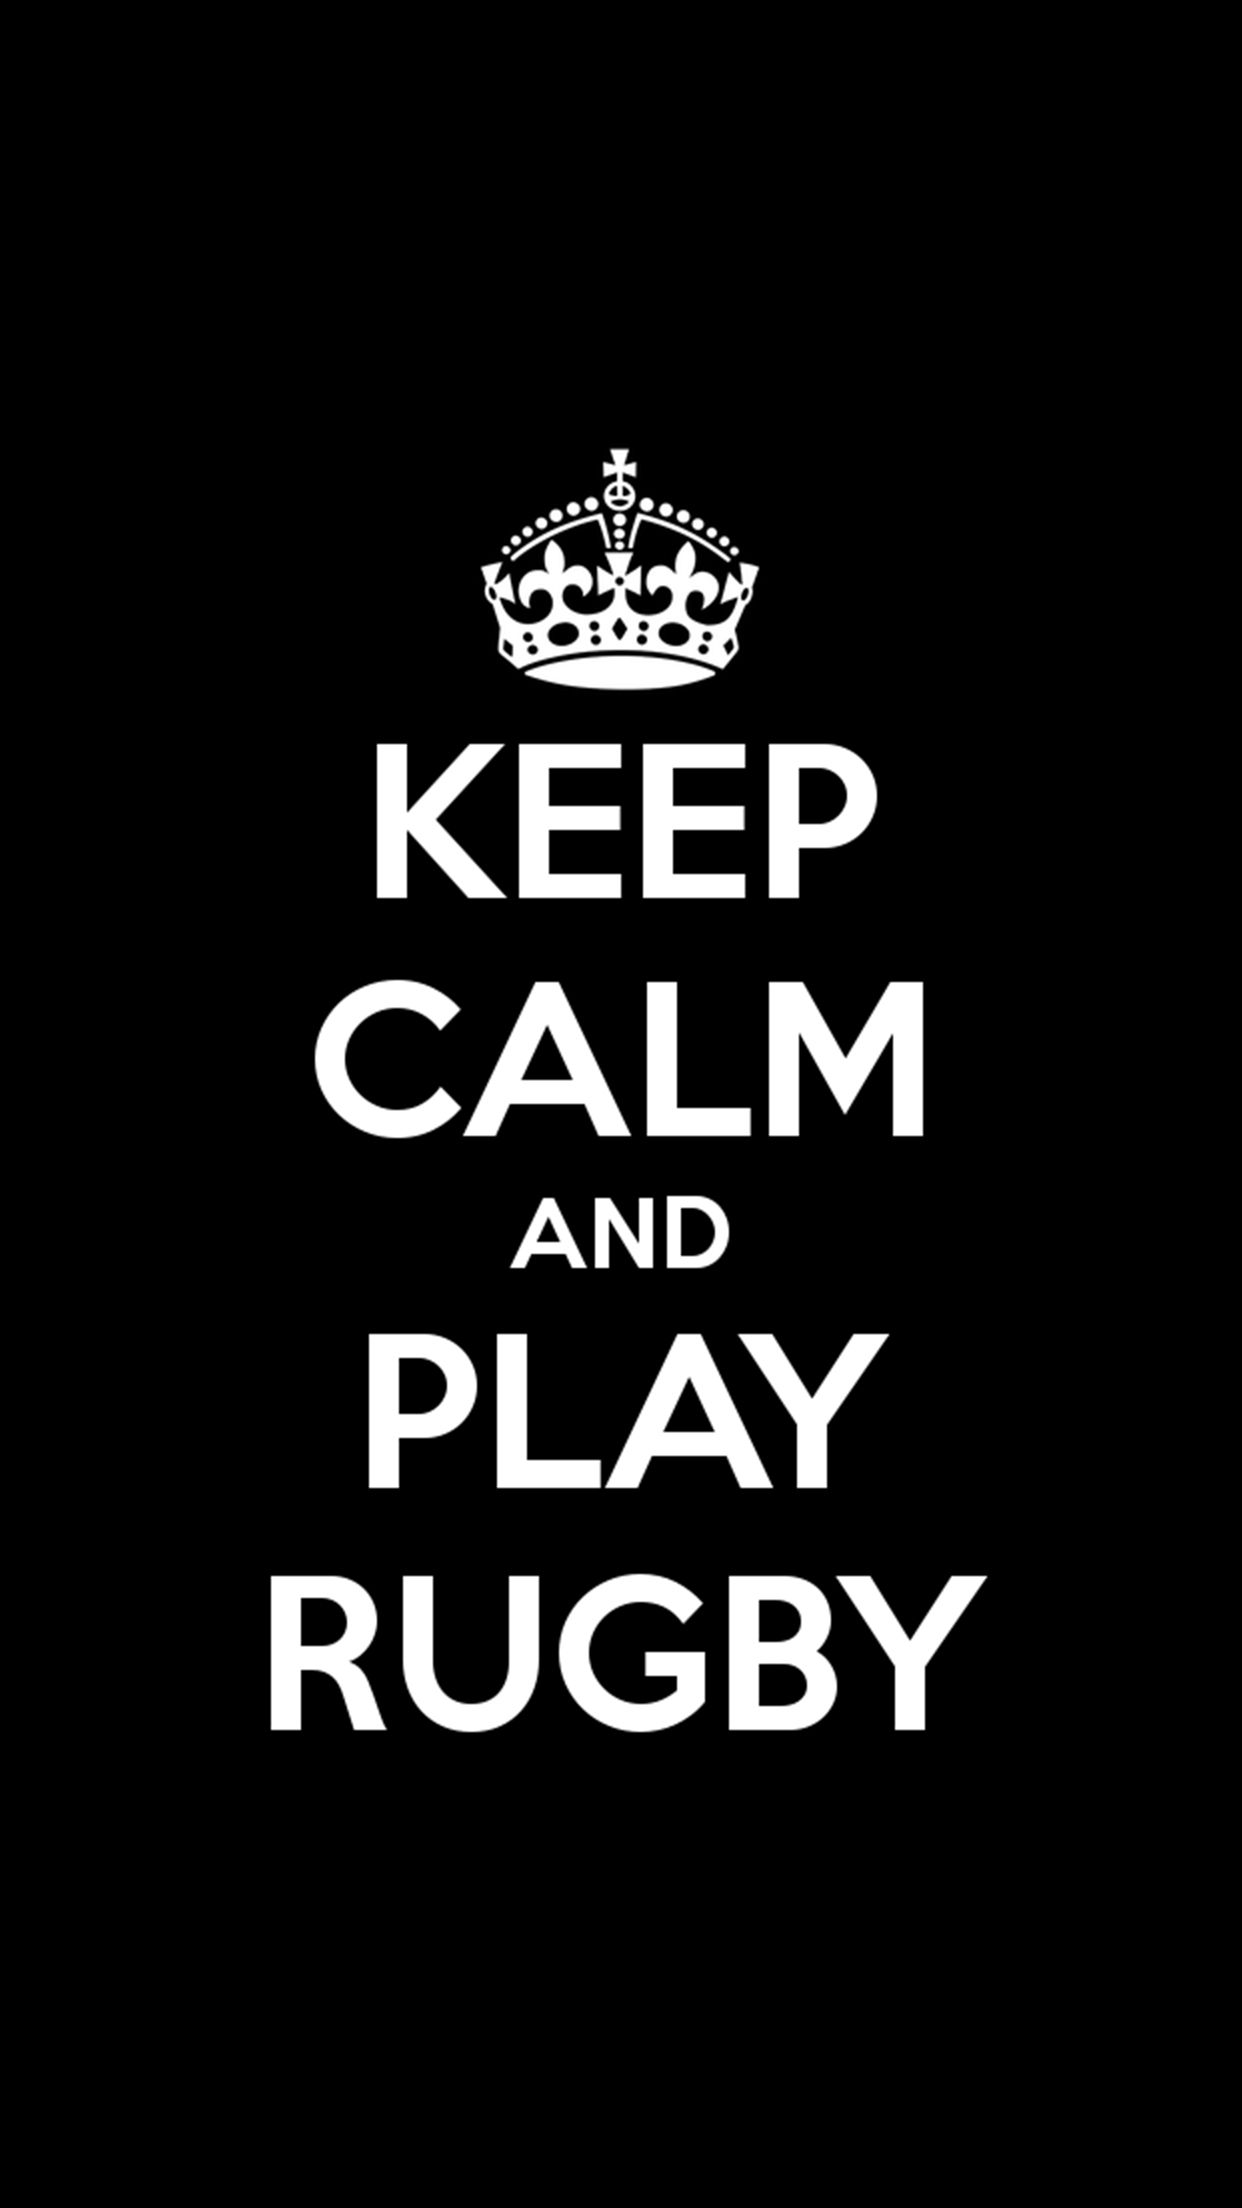 Rugby Keep Calm Wallpaper for iPhone Pro Max, X, 6